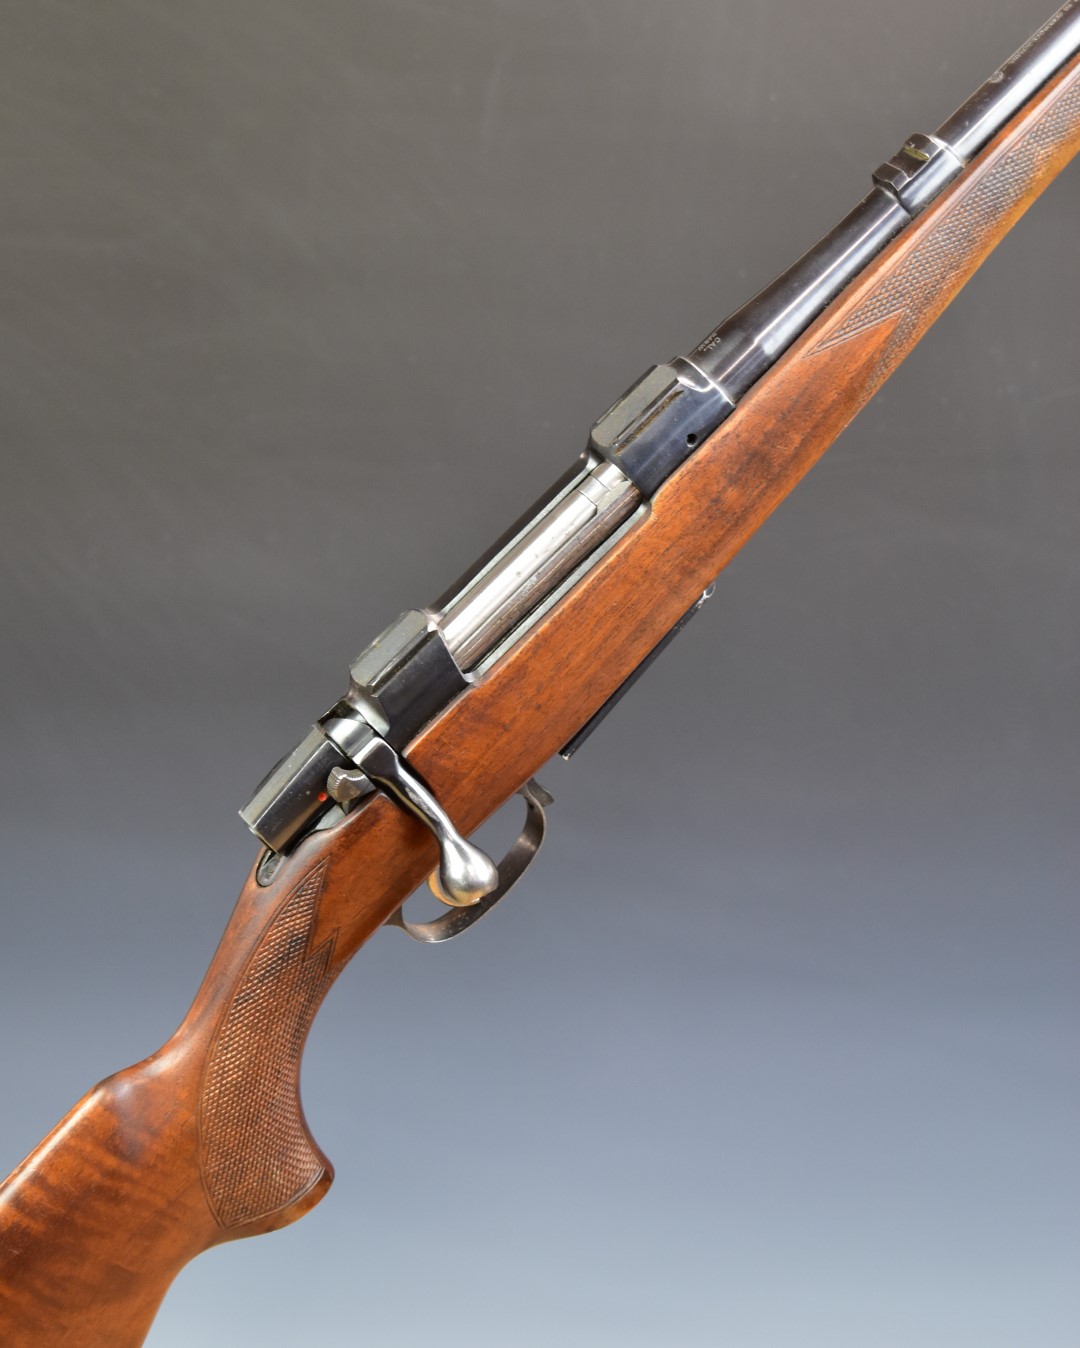 BRNO CZ 537 .243 bolt-action rifle with chequered semi-pistol grip and forend, raised cheek-piece,